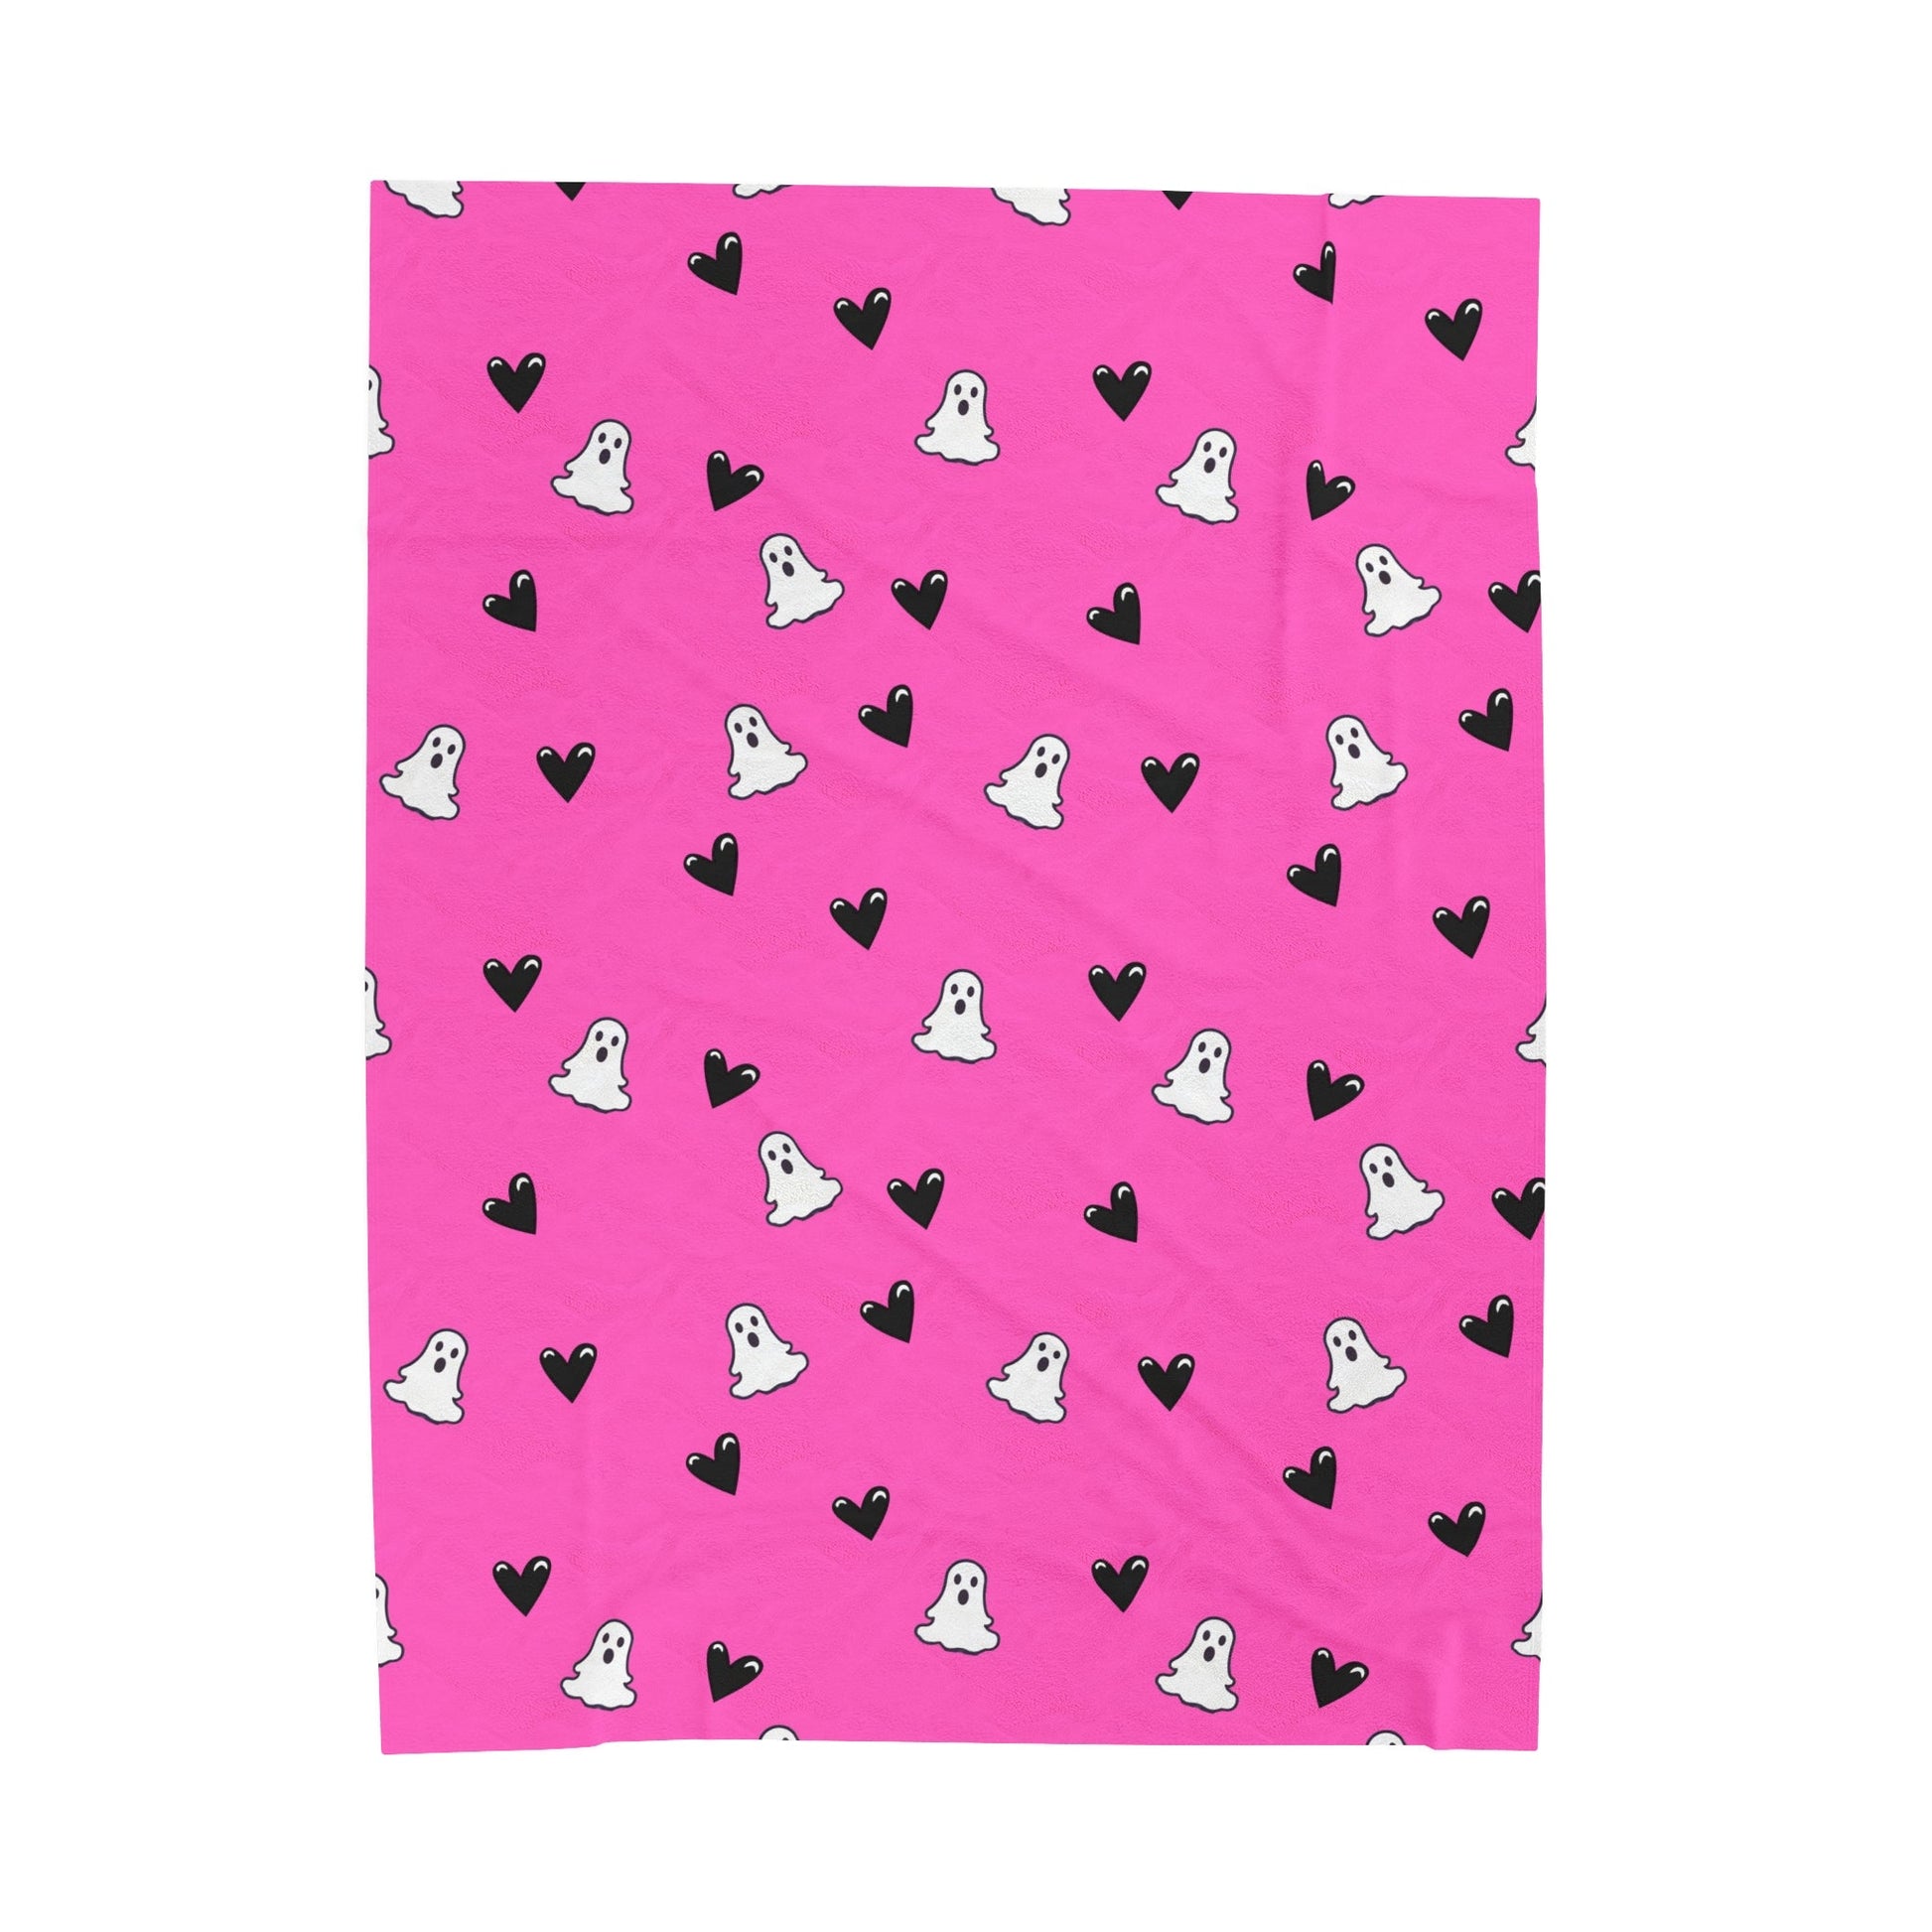 Ghosts and Black Hearts Throw BlanketAll Over PrintsVTZdesigns60" × 80"All Over PrintAOPBed